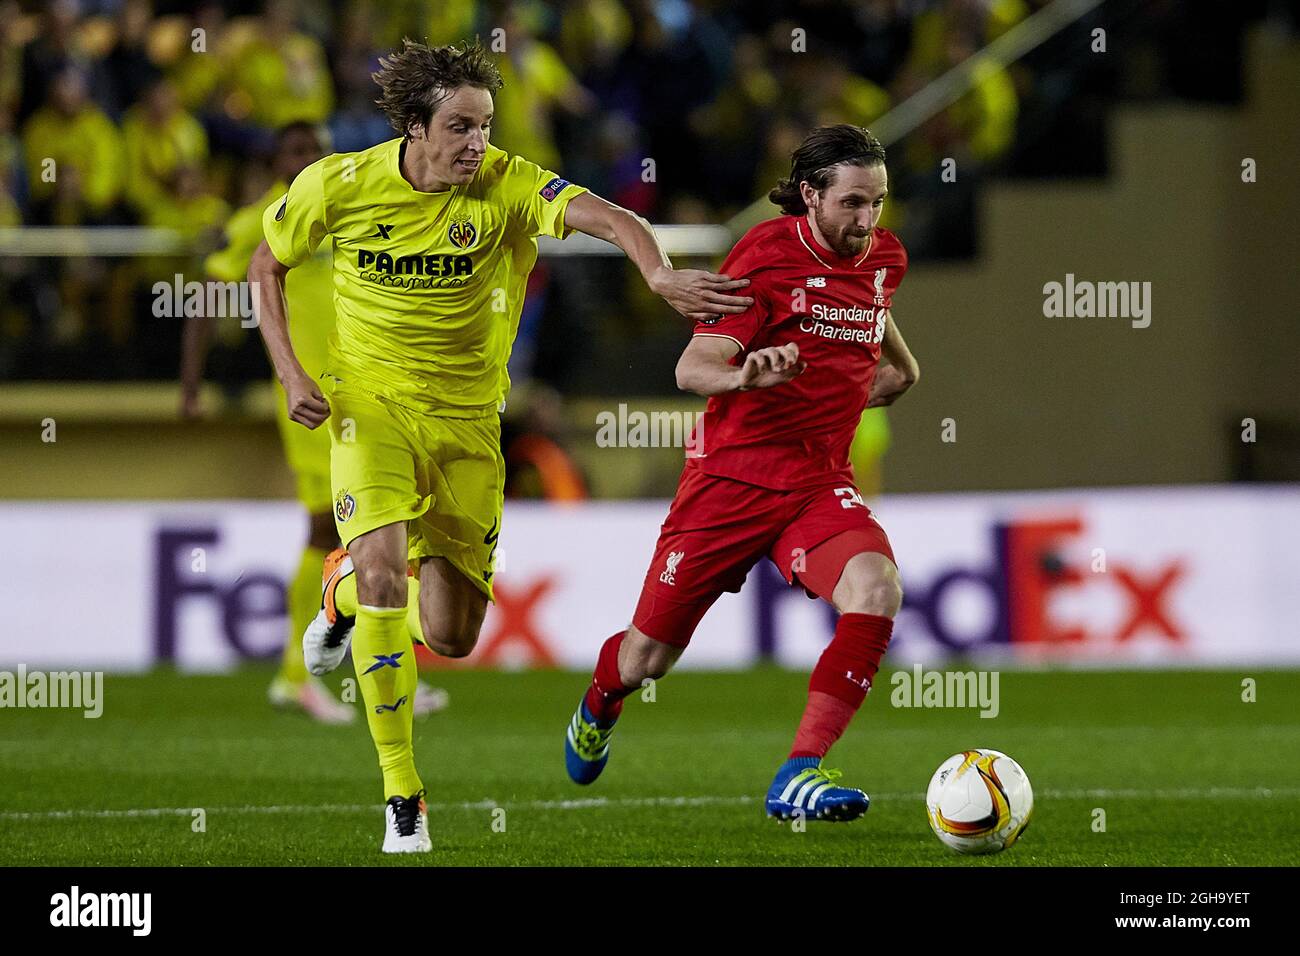 Joe Allen of Liverpool FC competes for the ball with Tomas Pina Spanish  midfielder of Villarreal CF during the UEFA Europa League Semi Final match  at El Madrigal stadium. Photo credit should